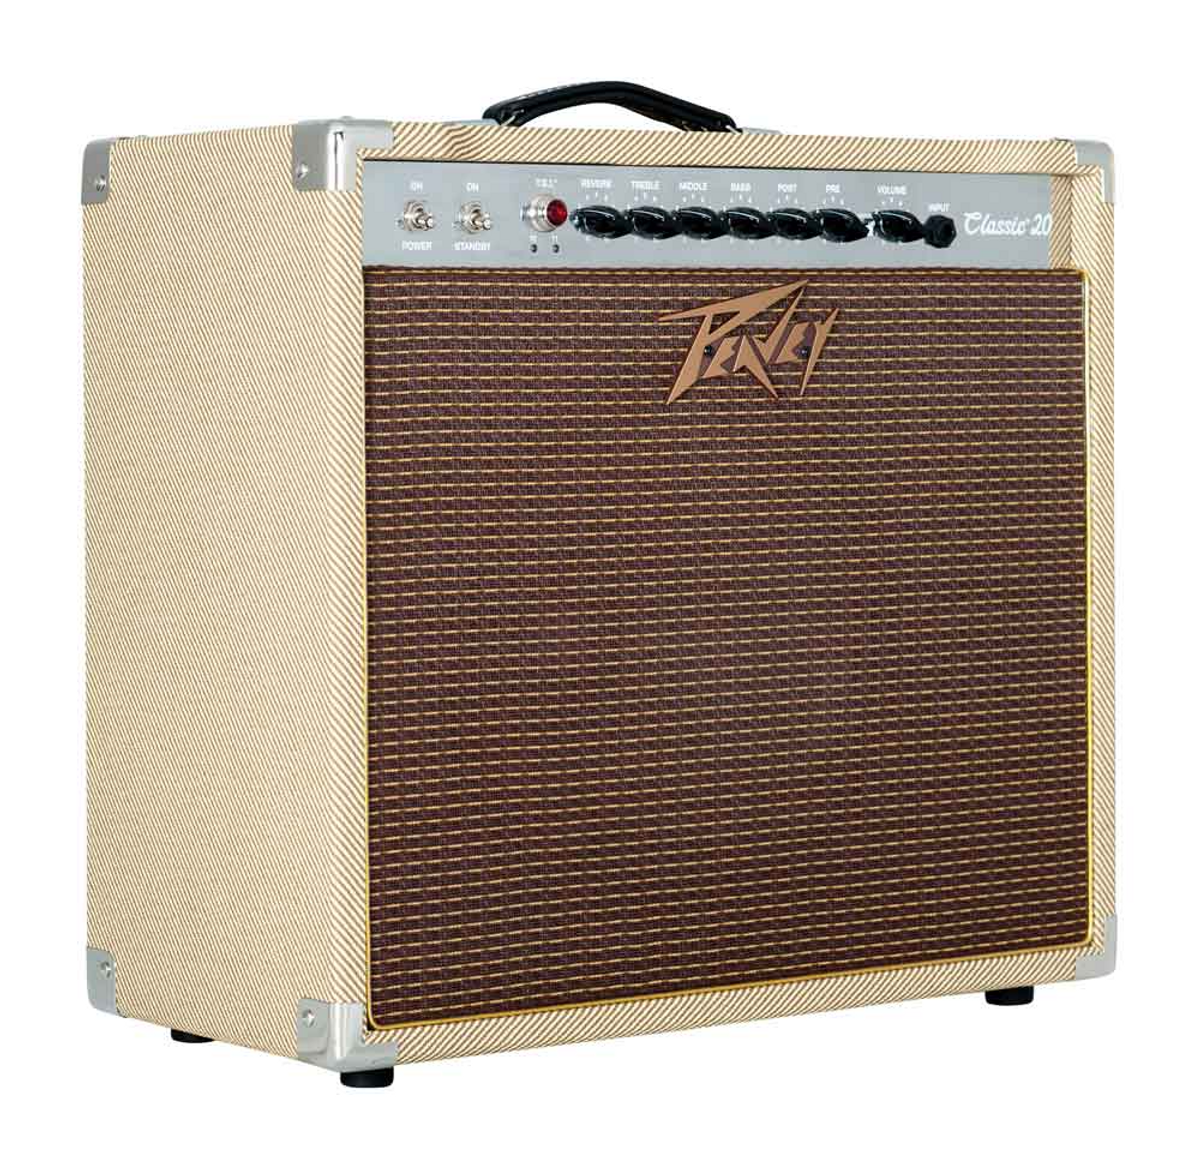 Peavey Classic 20 Review